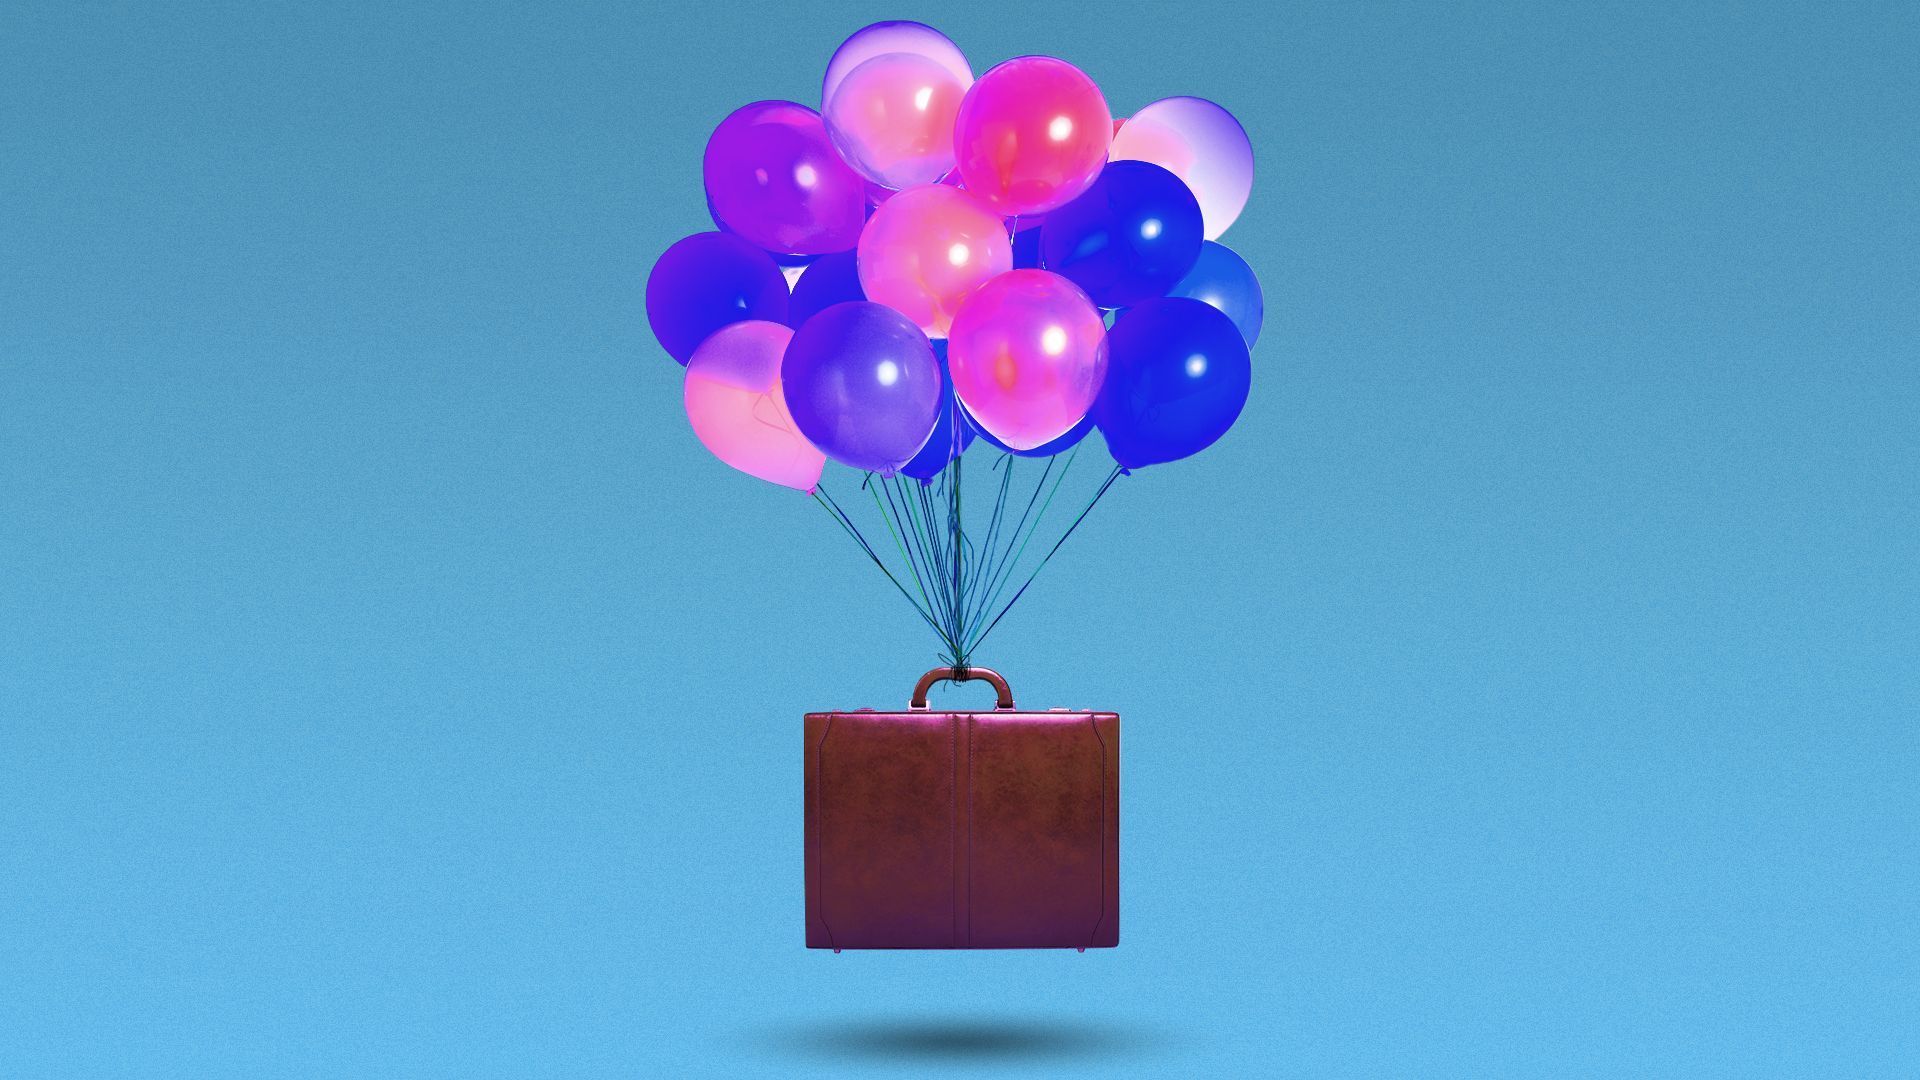 Illustration of a briefcase being lifted from the ground by balloons